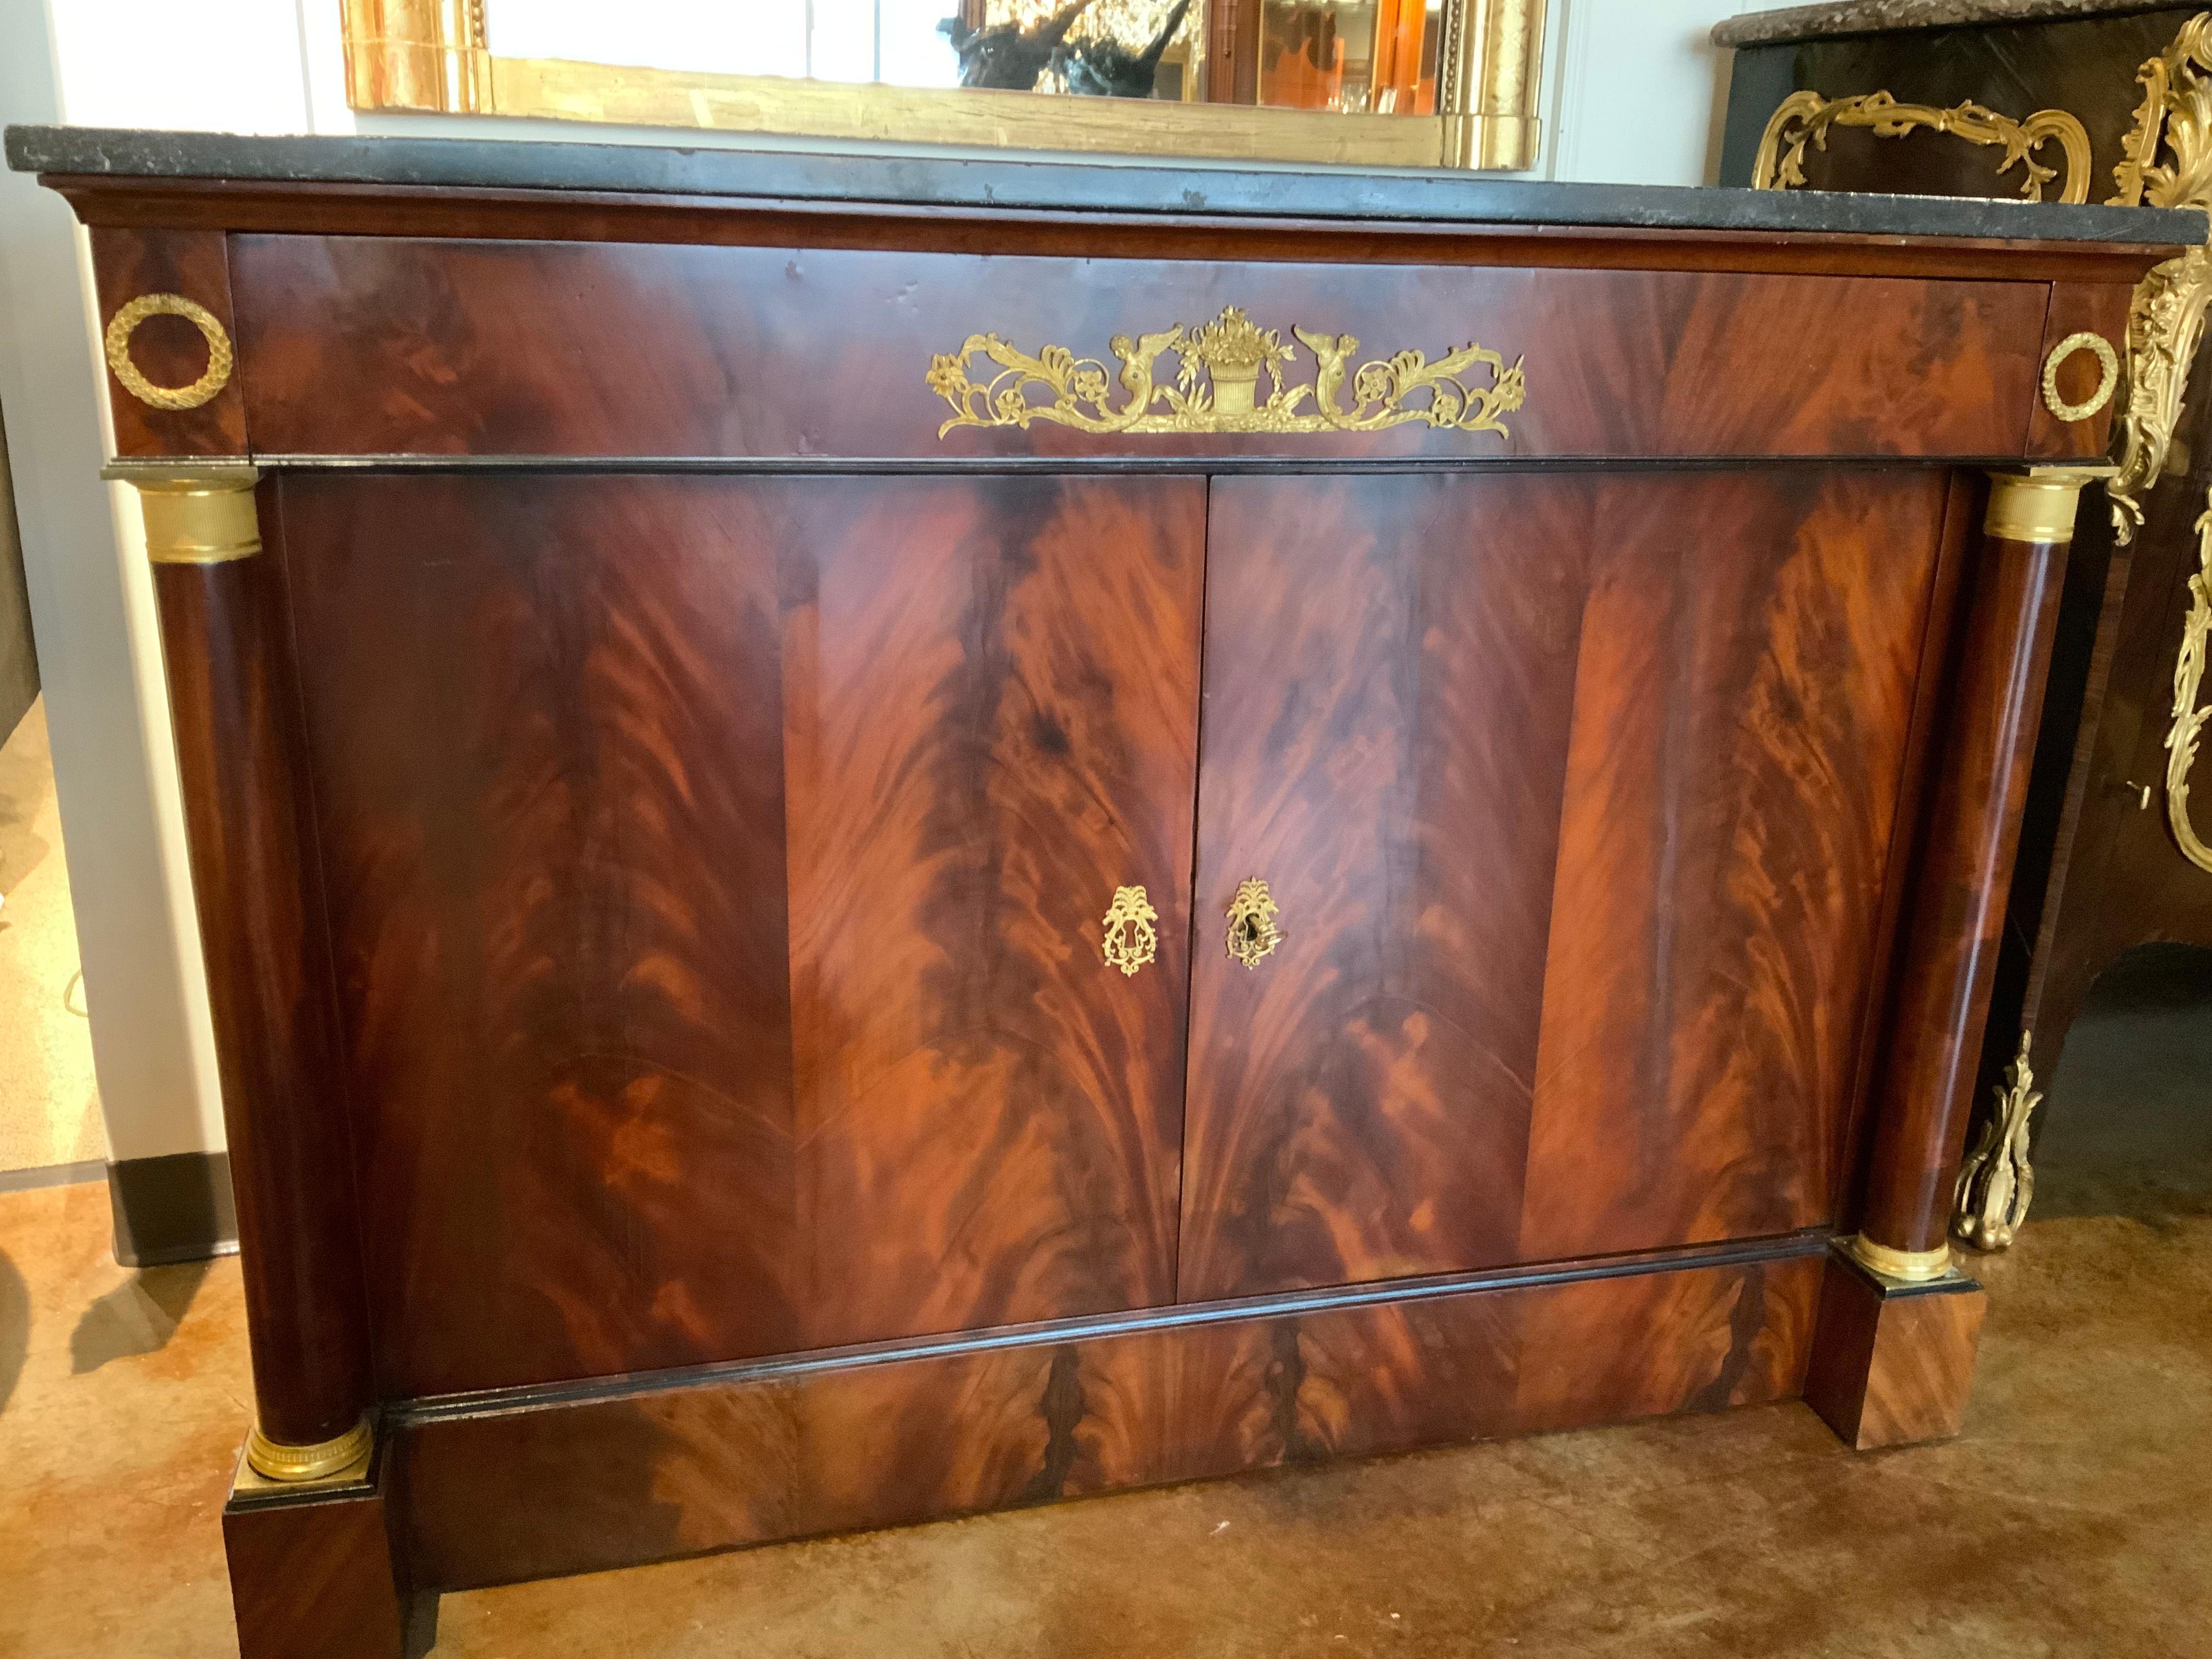 This cabinet is made of flame mahogany which makes it
Not only beautiful but strong and sturdy. It has a charcoal gray
Hue marble top. No breaks or restorations to the marble.
It has two doors that open to one shelf inside. It has one
Drawer